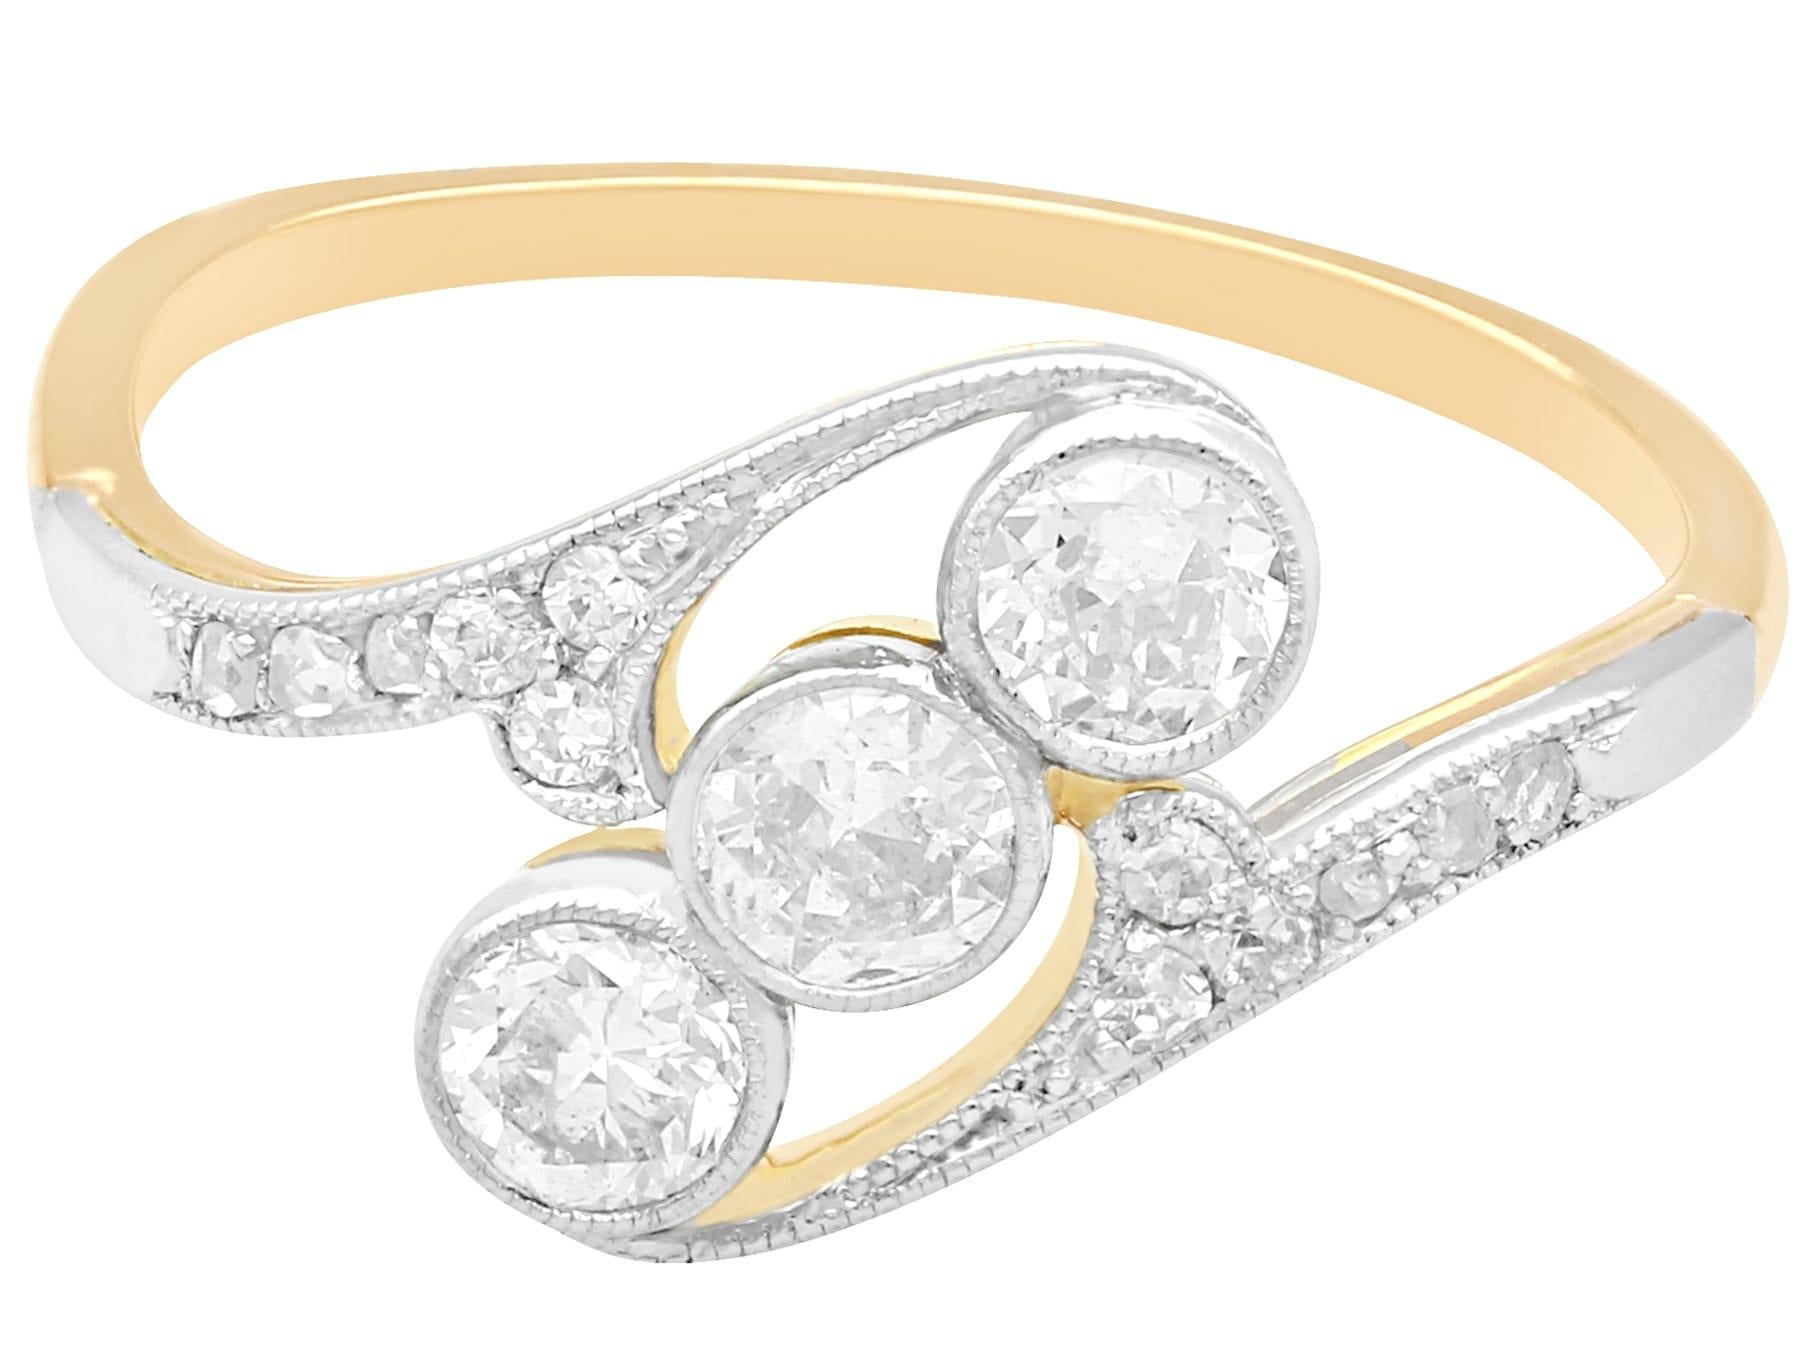 trilogy engagement ring gold